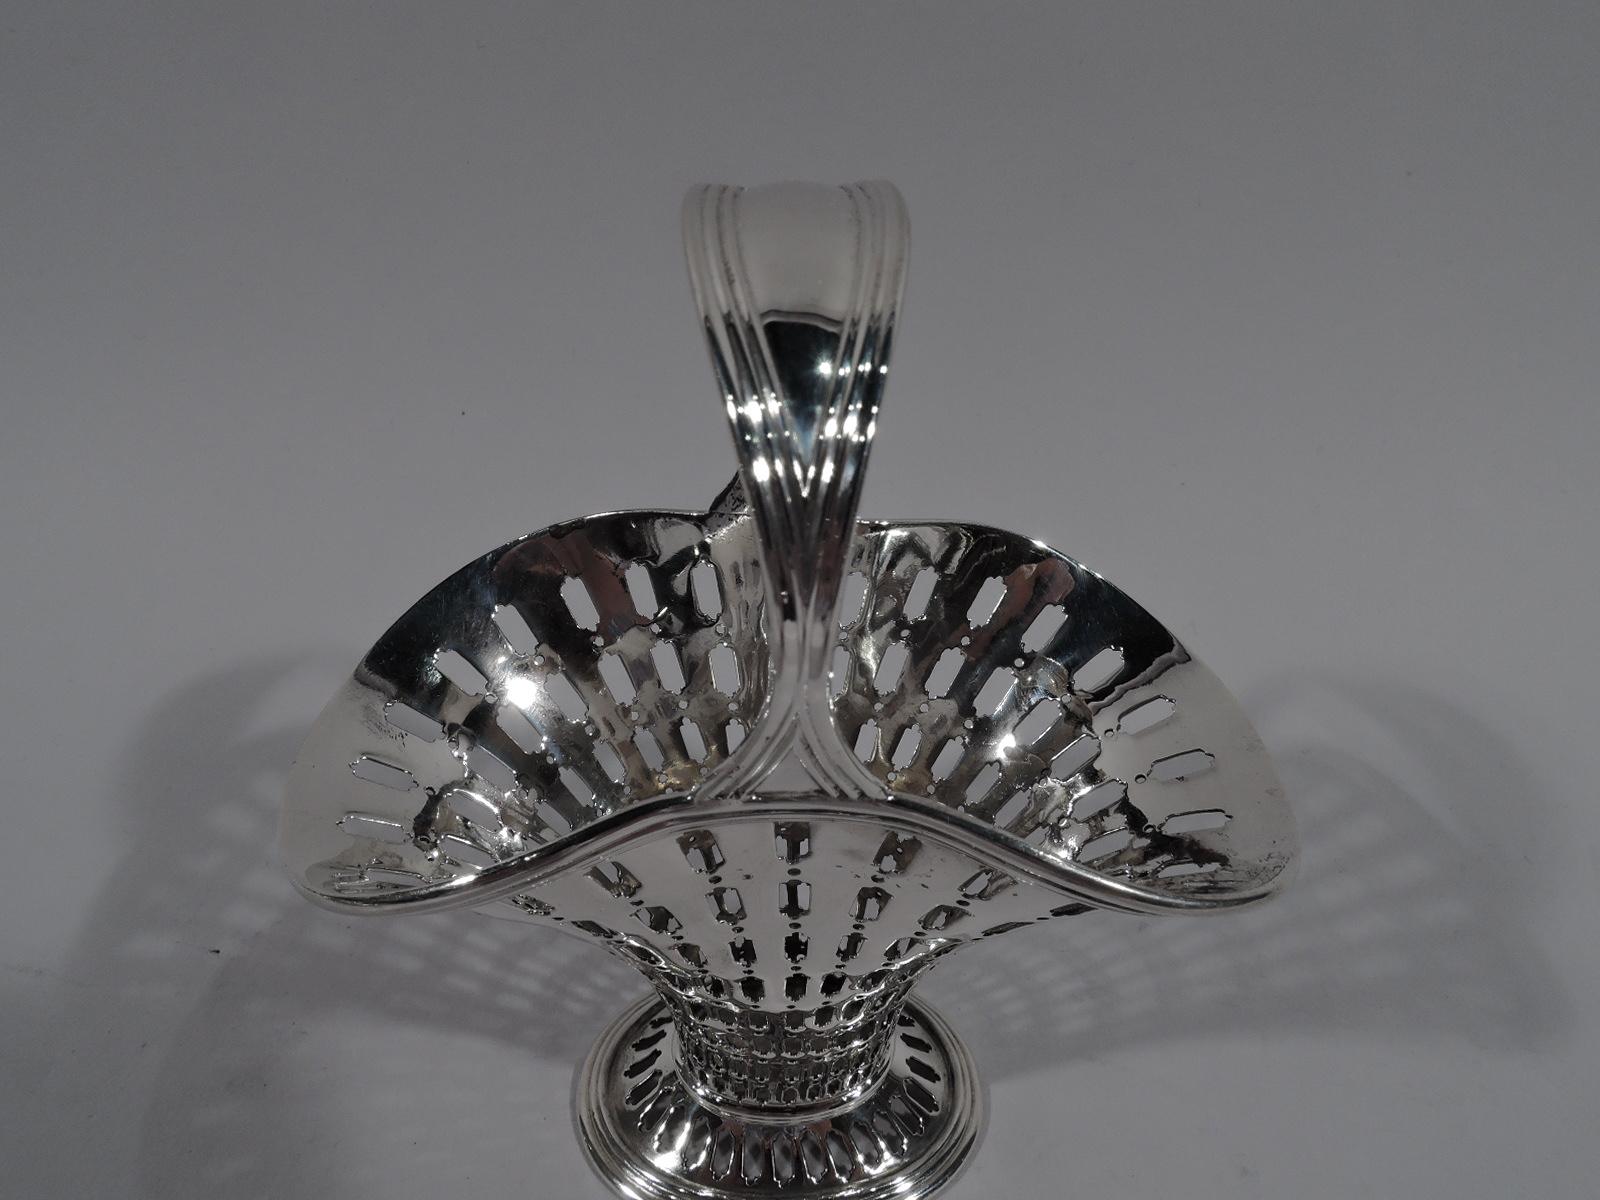 Small Edwardian Modern sterling silver basket. Made by Tiffany & Co. in New York. Tapering and “squashed” ovoid body with flared mouth and spread foot. Reeded and tapering stationary handle. Graduated tubular piercing. Hallmark includes pattern no.